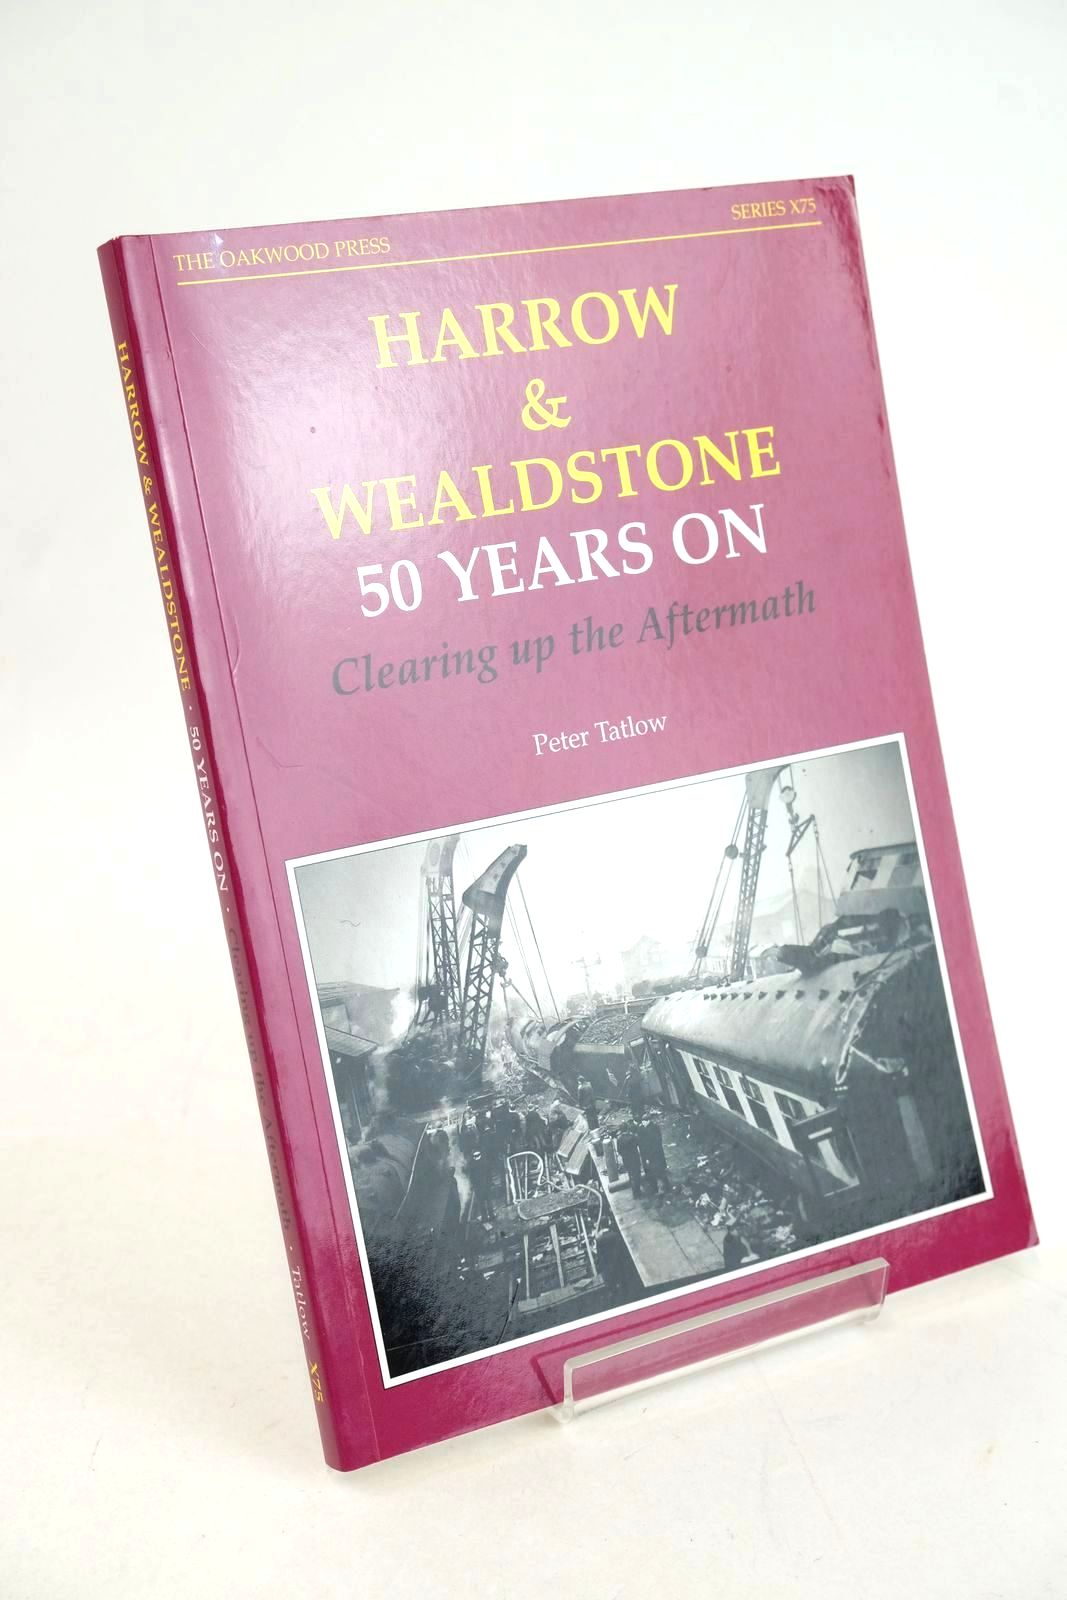 Photo of HARROW & WEALDSTONE 50 YEARS ON - CLEARING UP THE AFTERMATH- Stock Number: 1327492